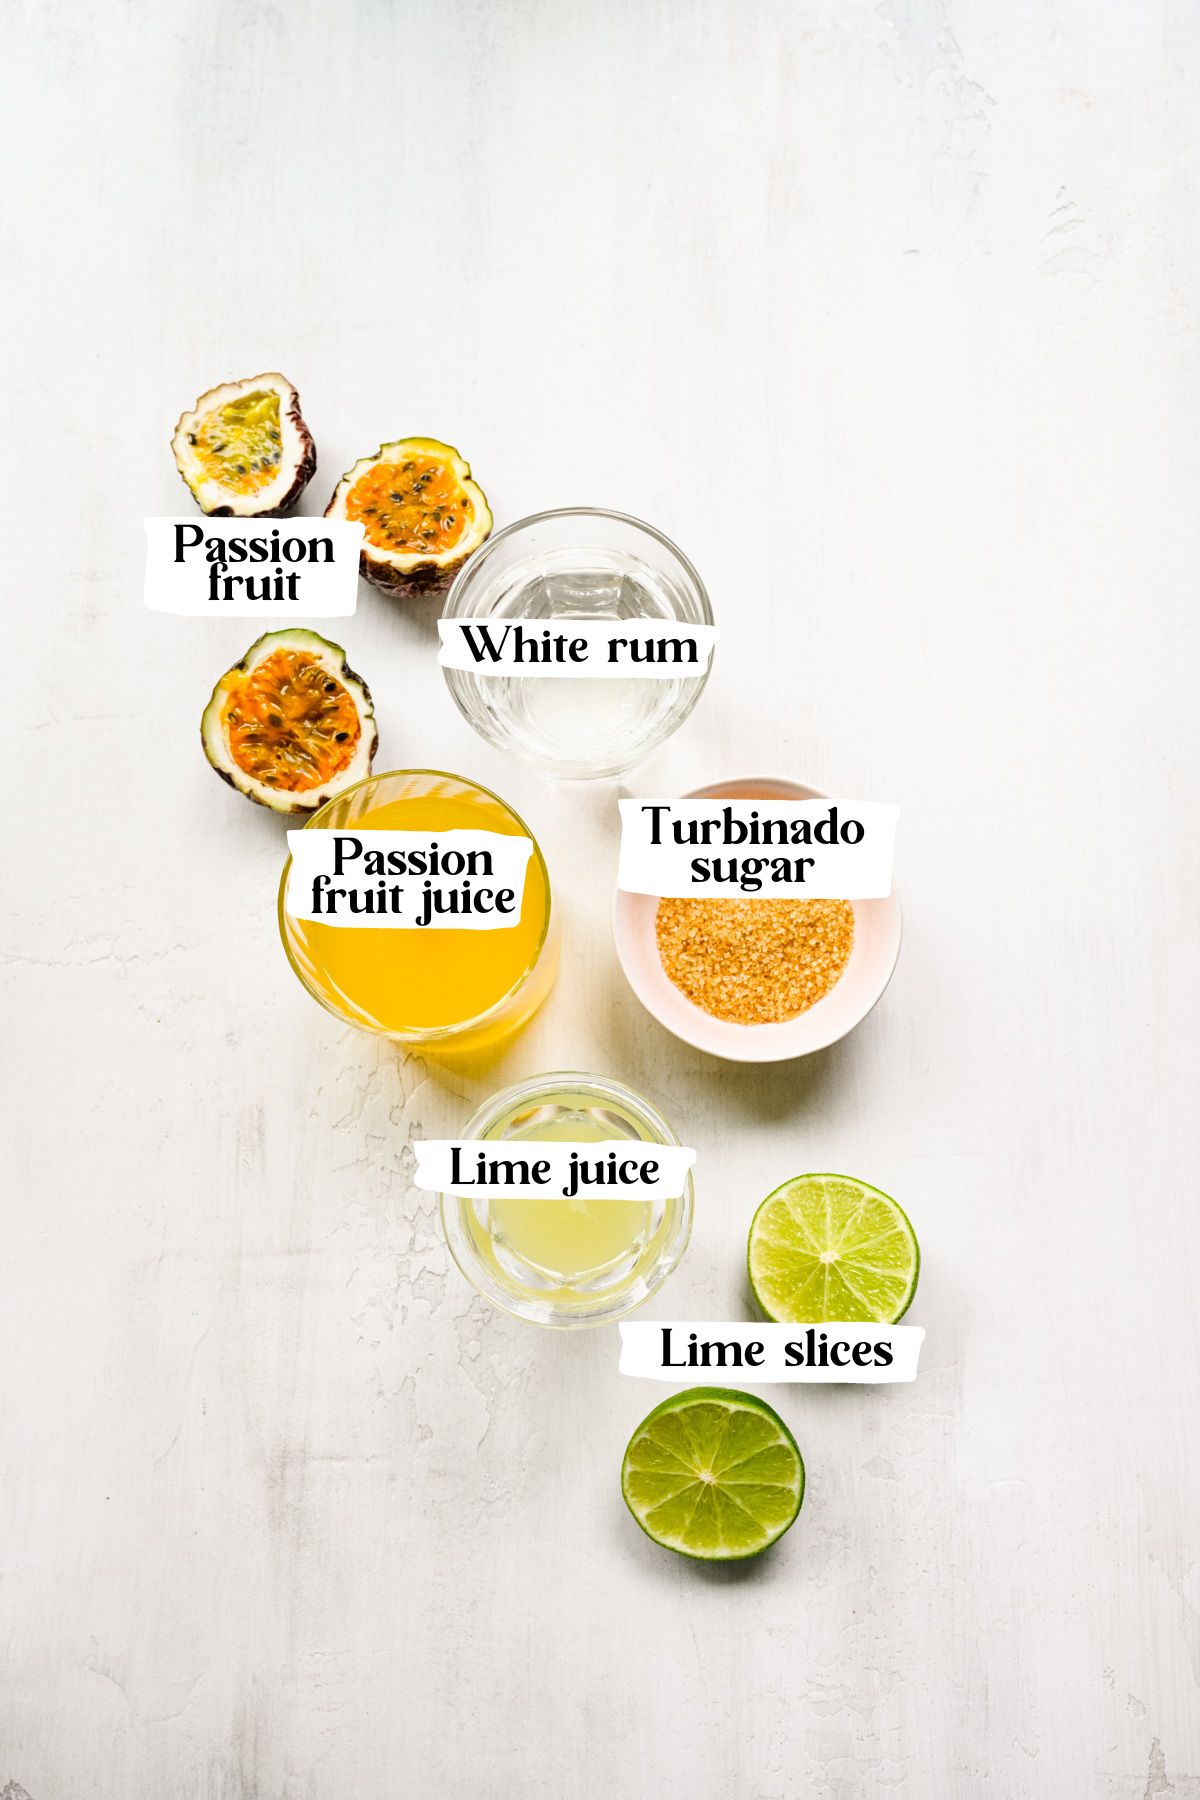 Passion fruit daiquiri ingredients including white rum and lime juice.